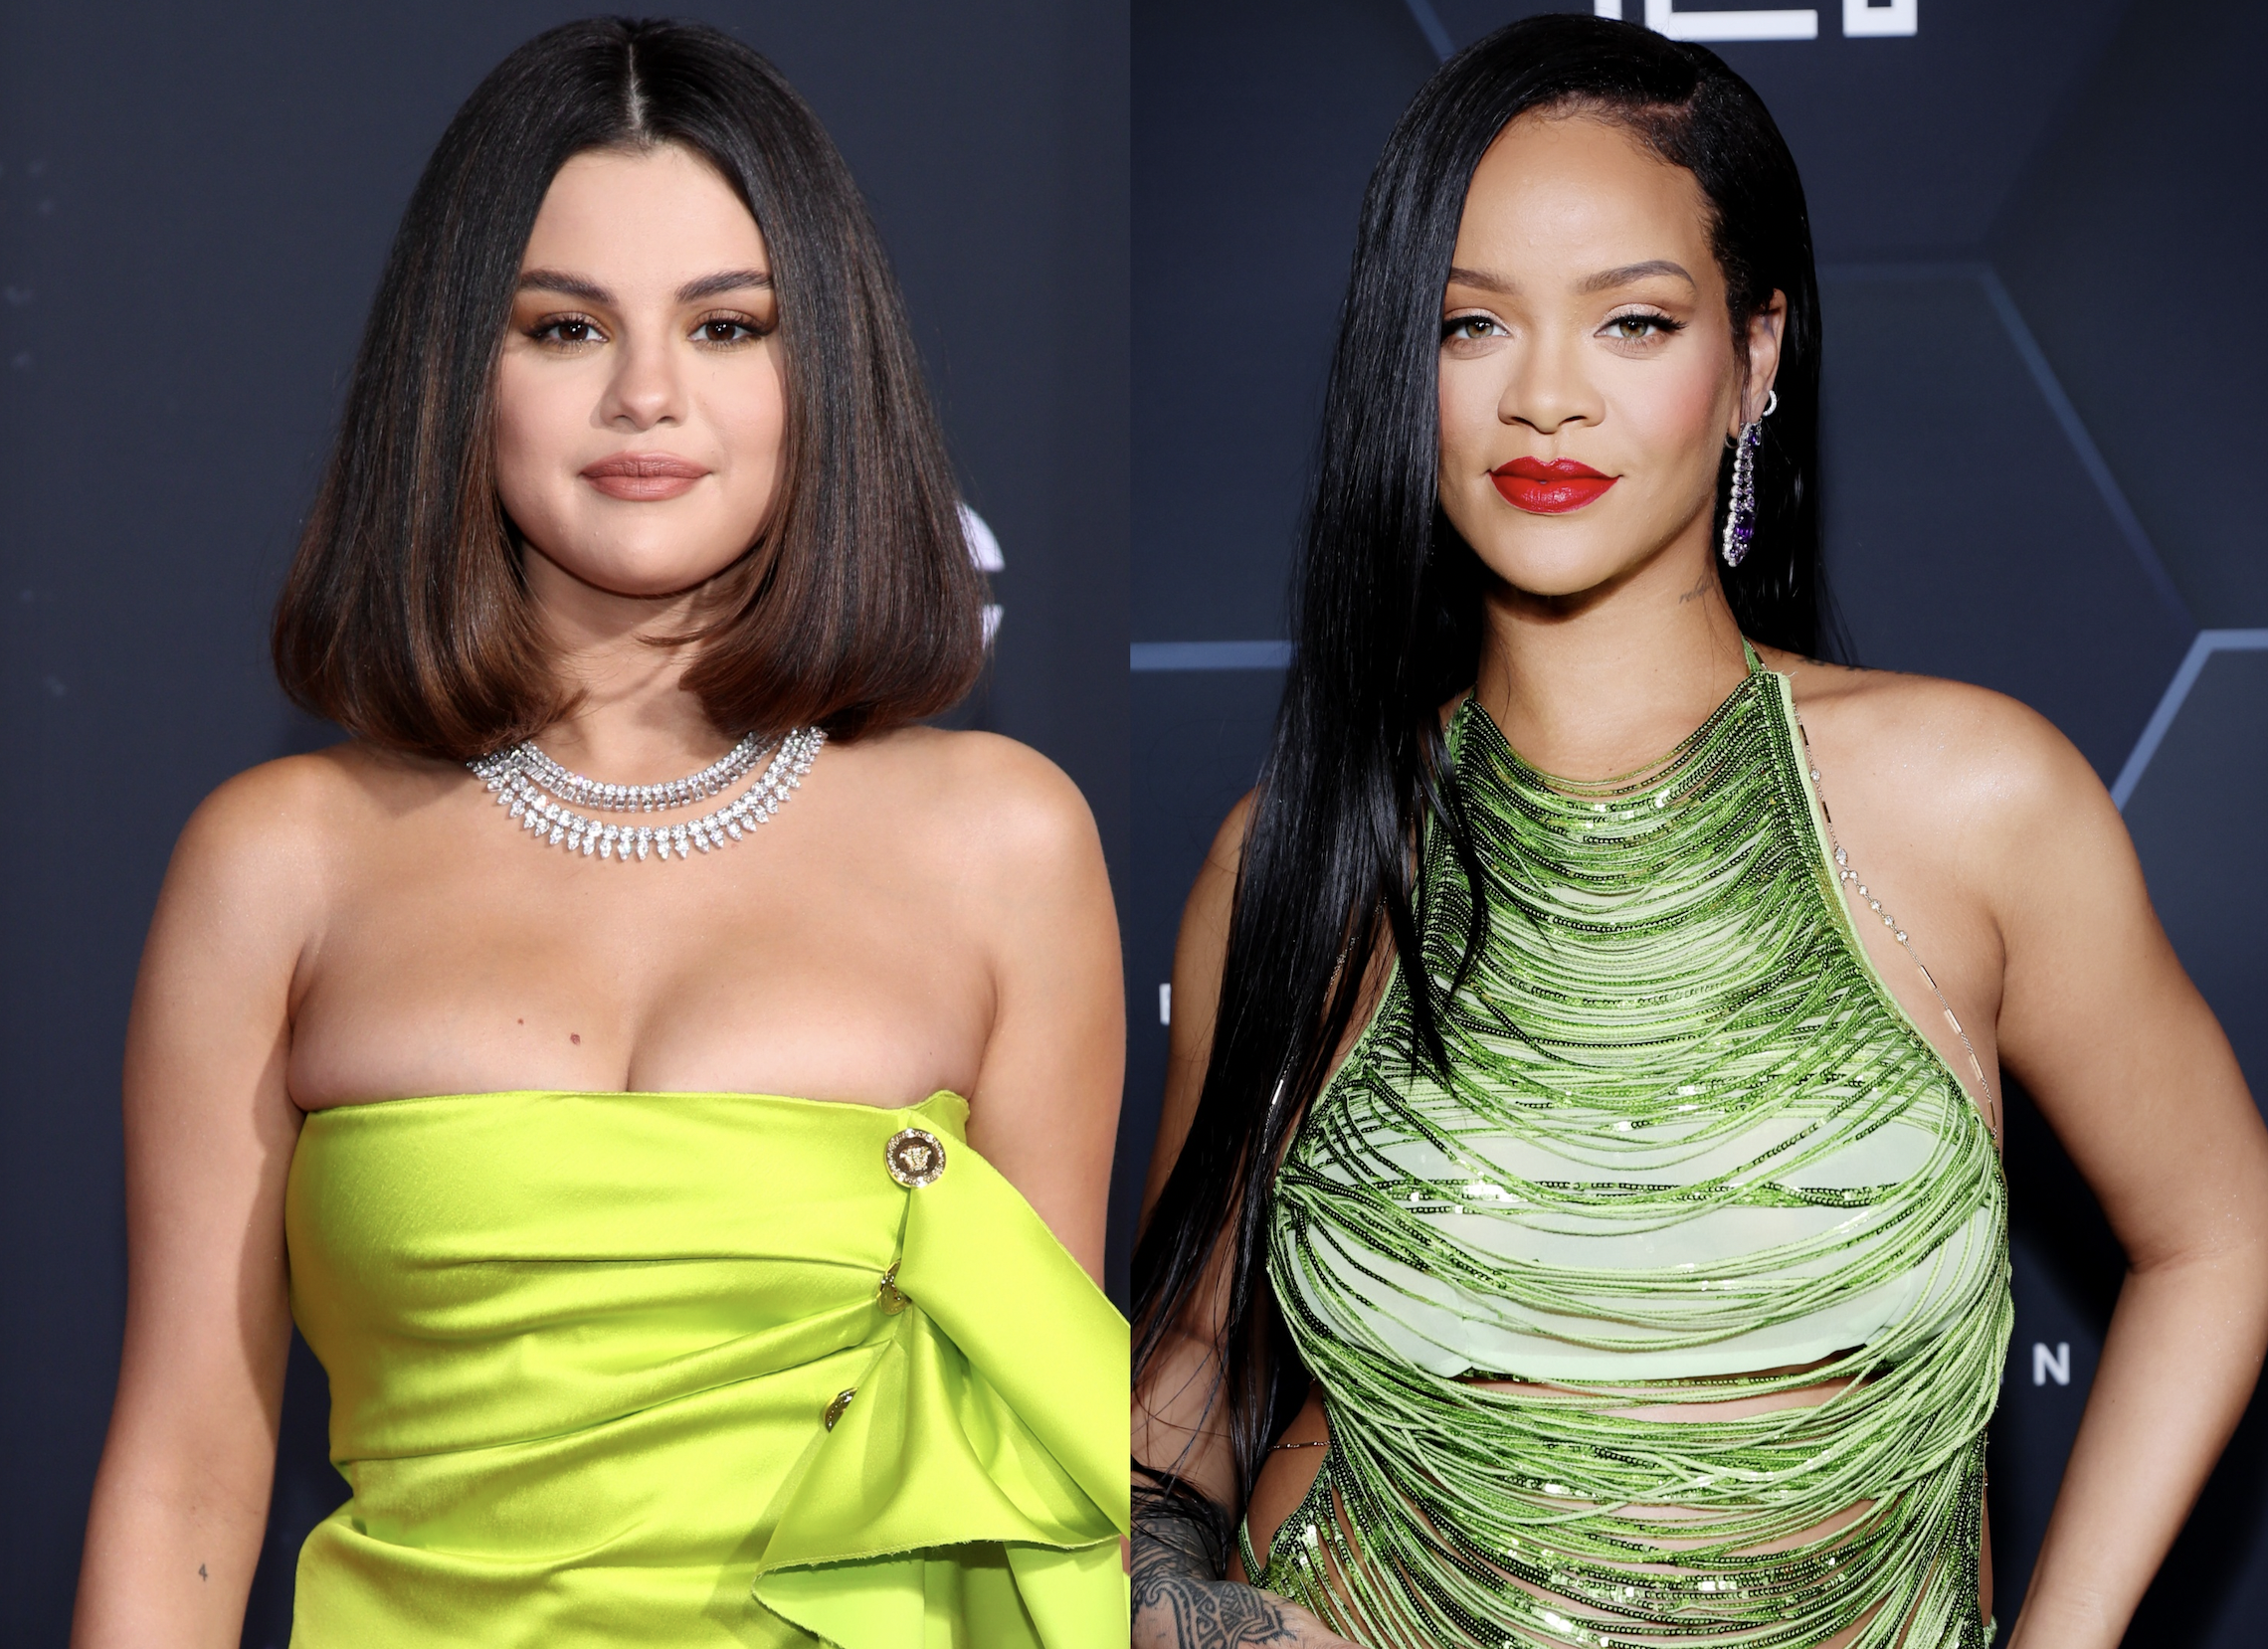 Selena Gomez’s Next Album Comparable To Rihanna’s “Good Girl Gone Bad”: Report